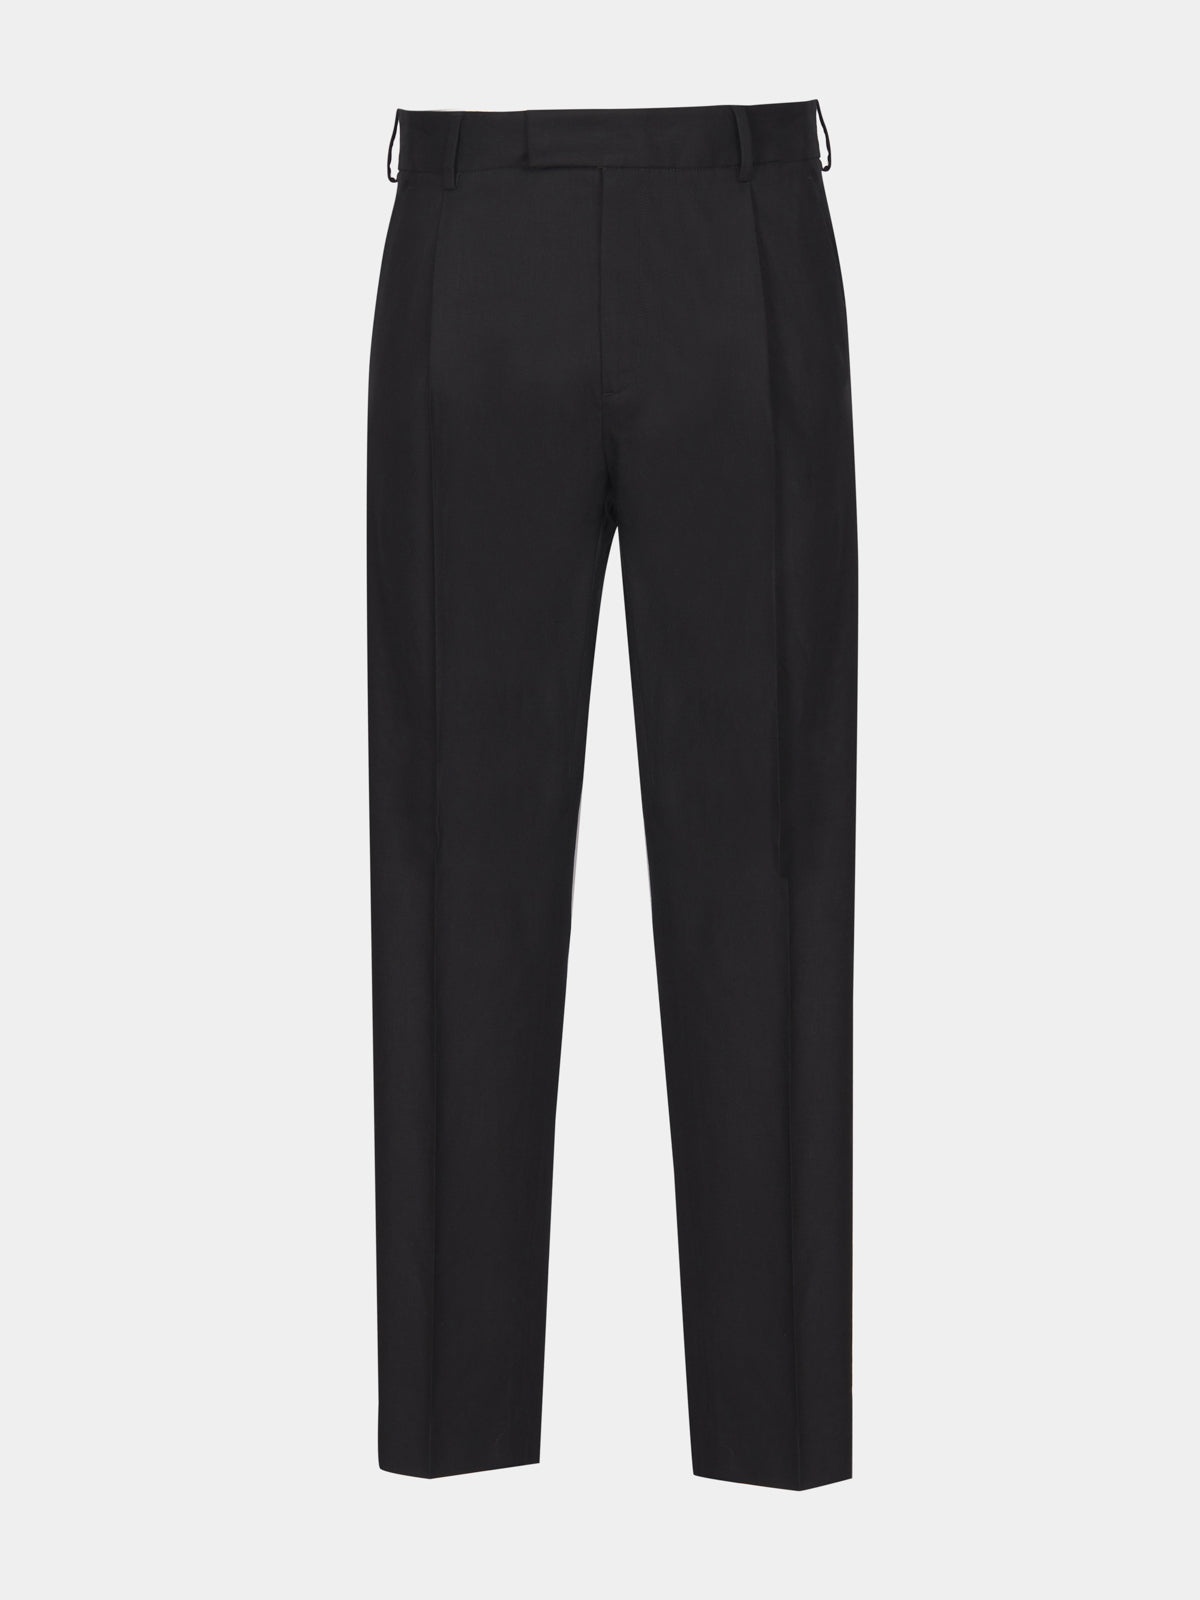 Trousers with pleats in black stretch linen